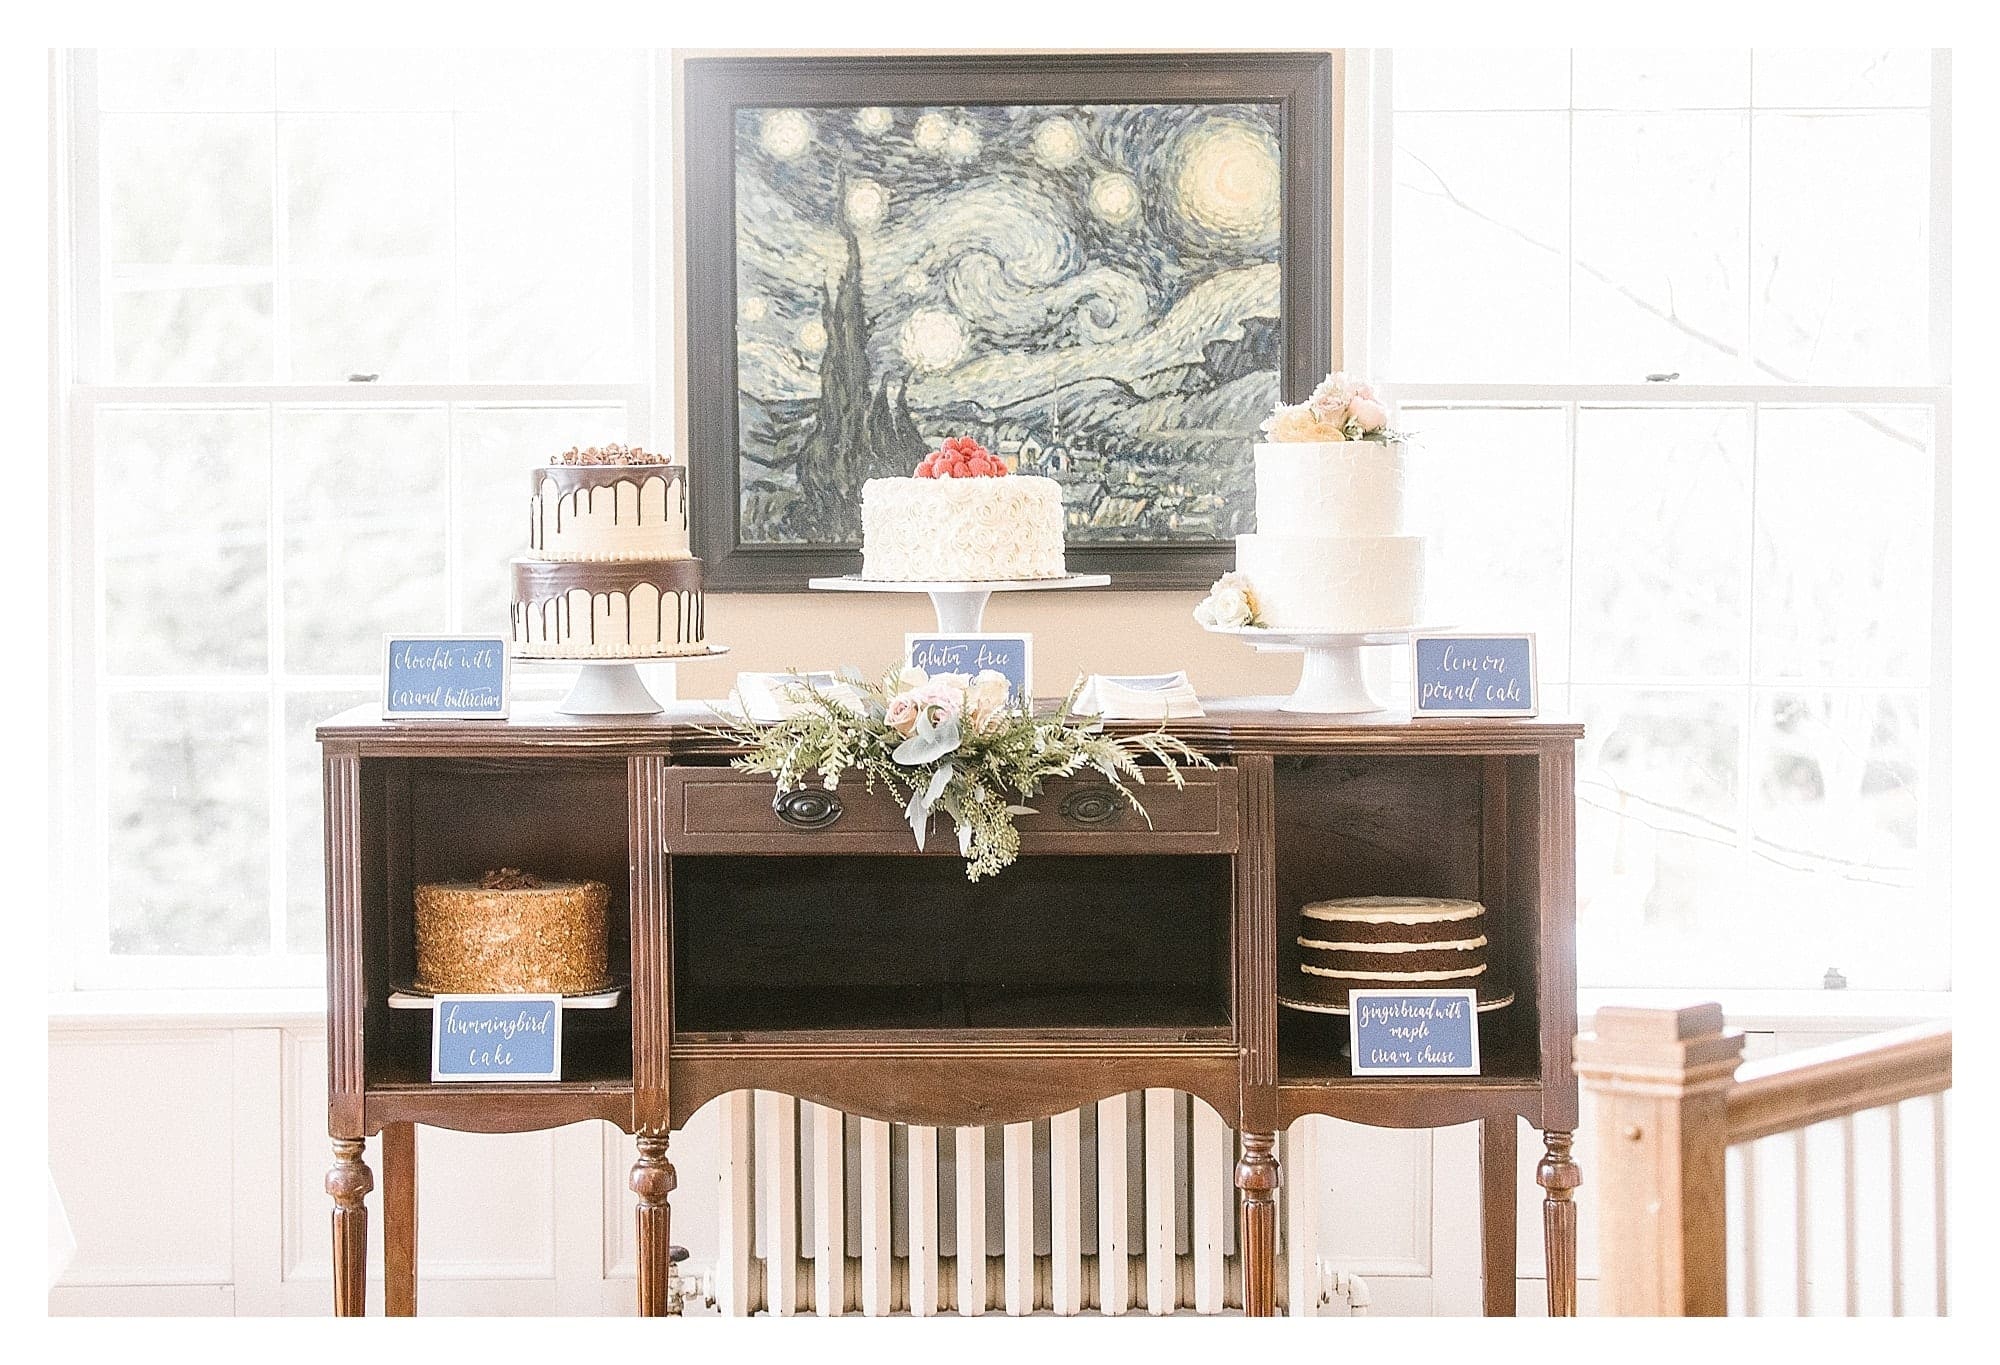 Display of cakes on antique buffet